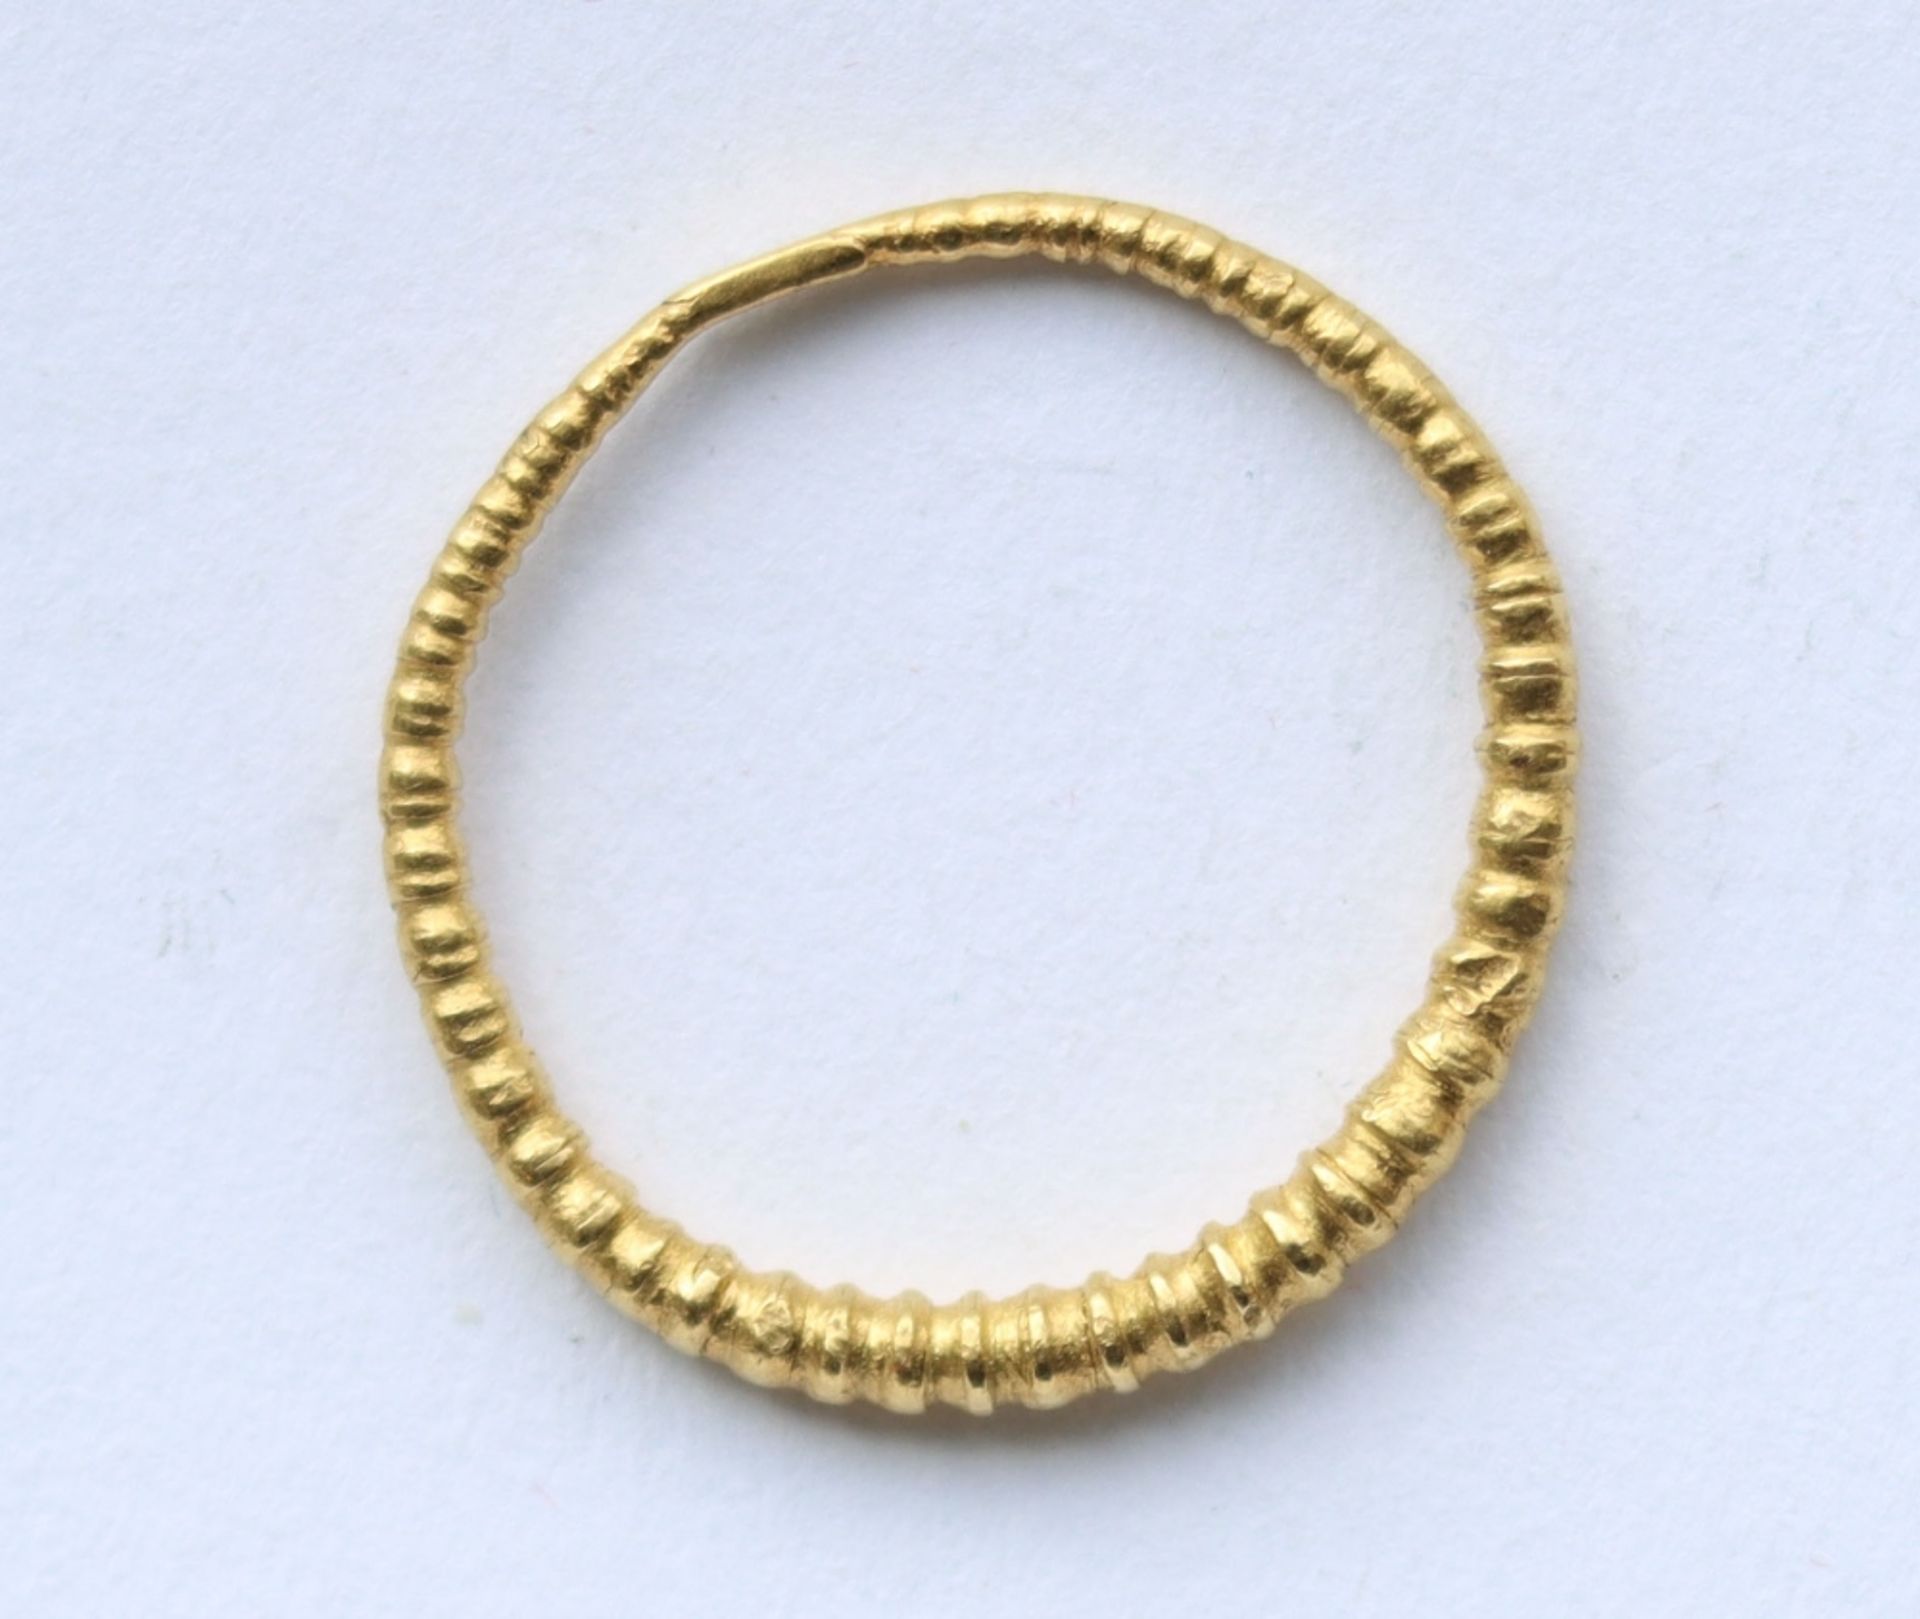 An Anglo-Saxon or Viking gold finger ring, 10th-11th Century